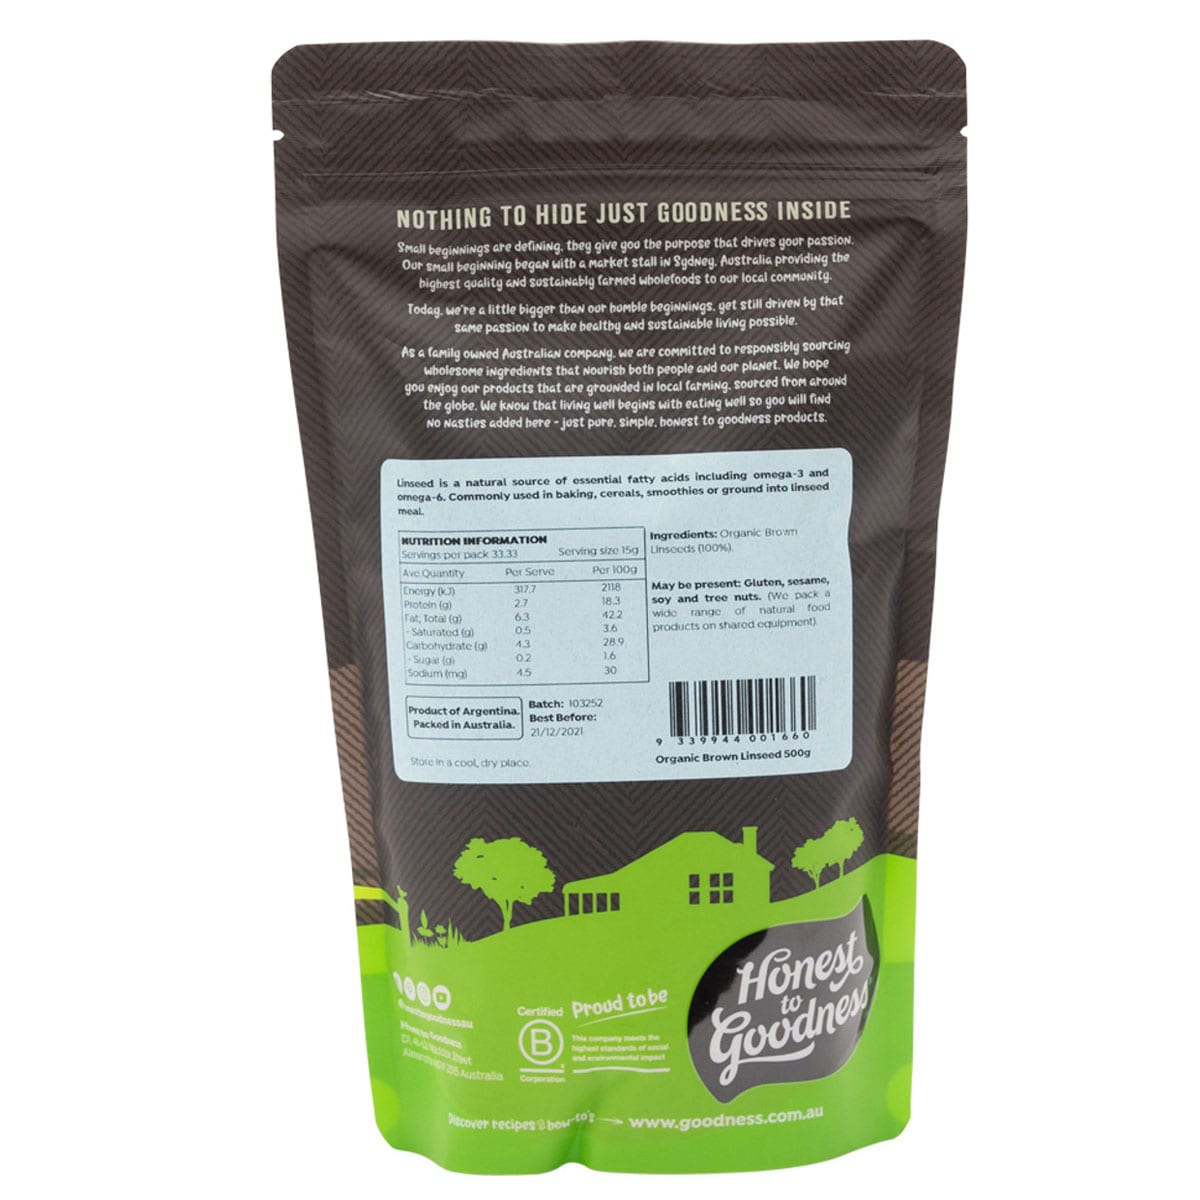 Honest to Goodness Organic Linseed Brown 500g